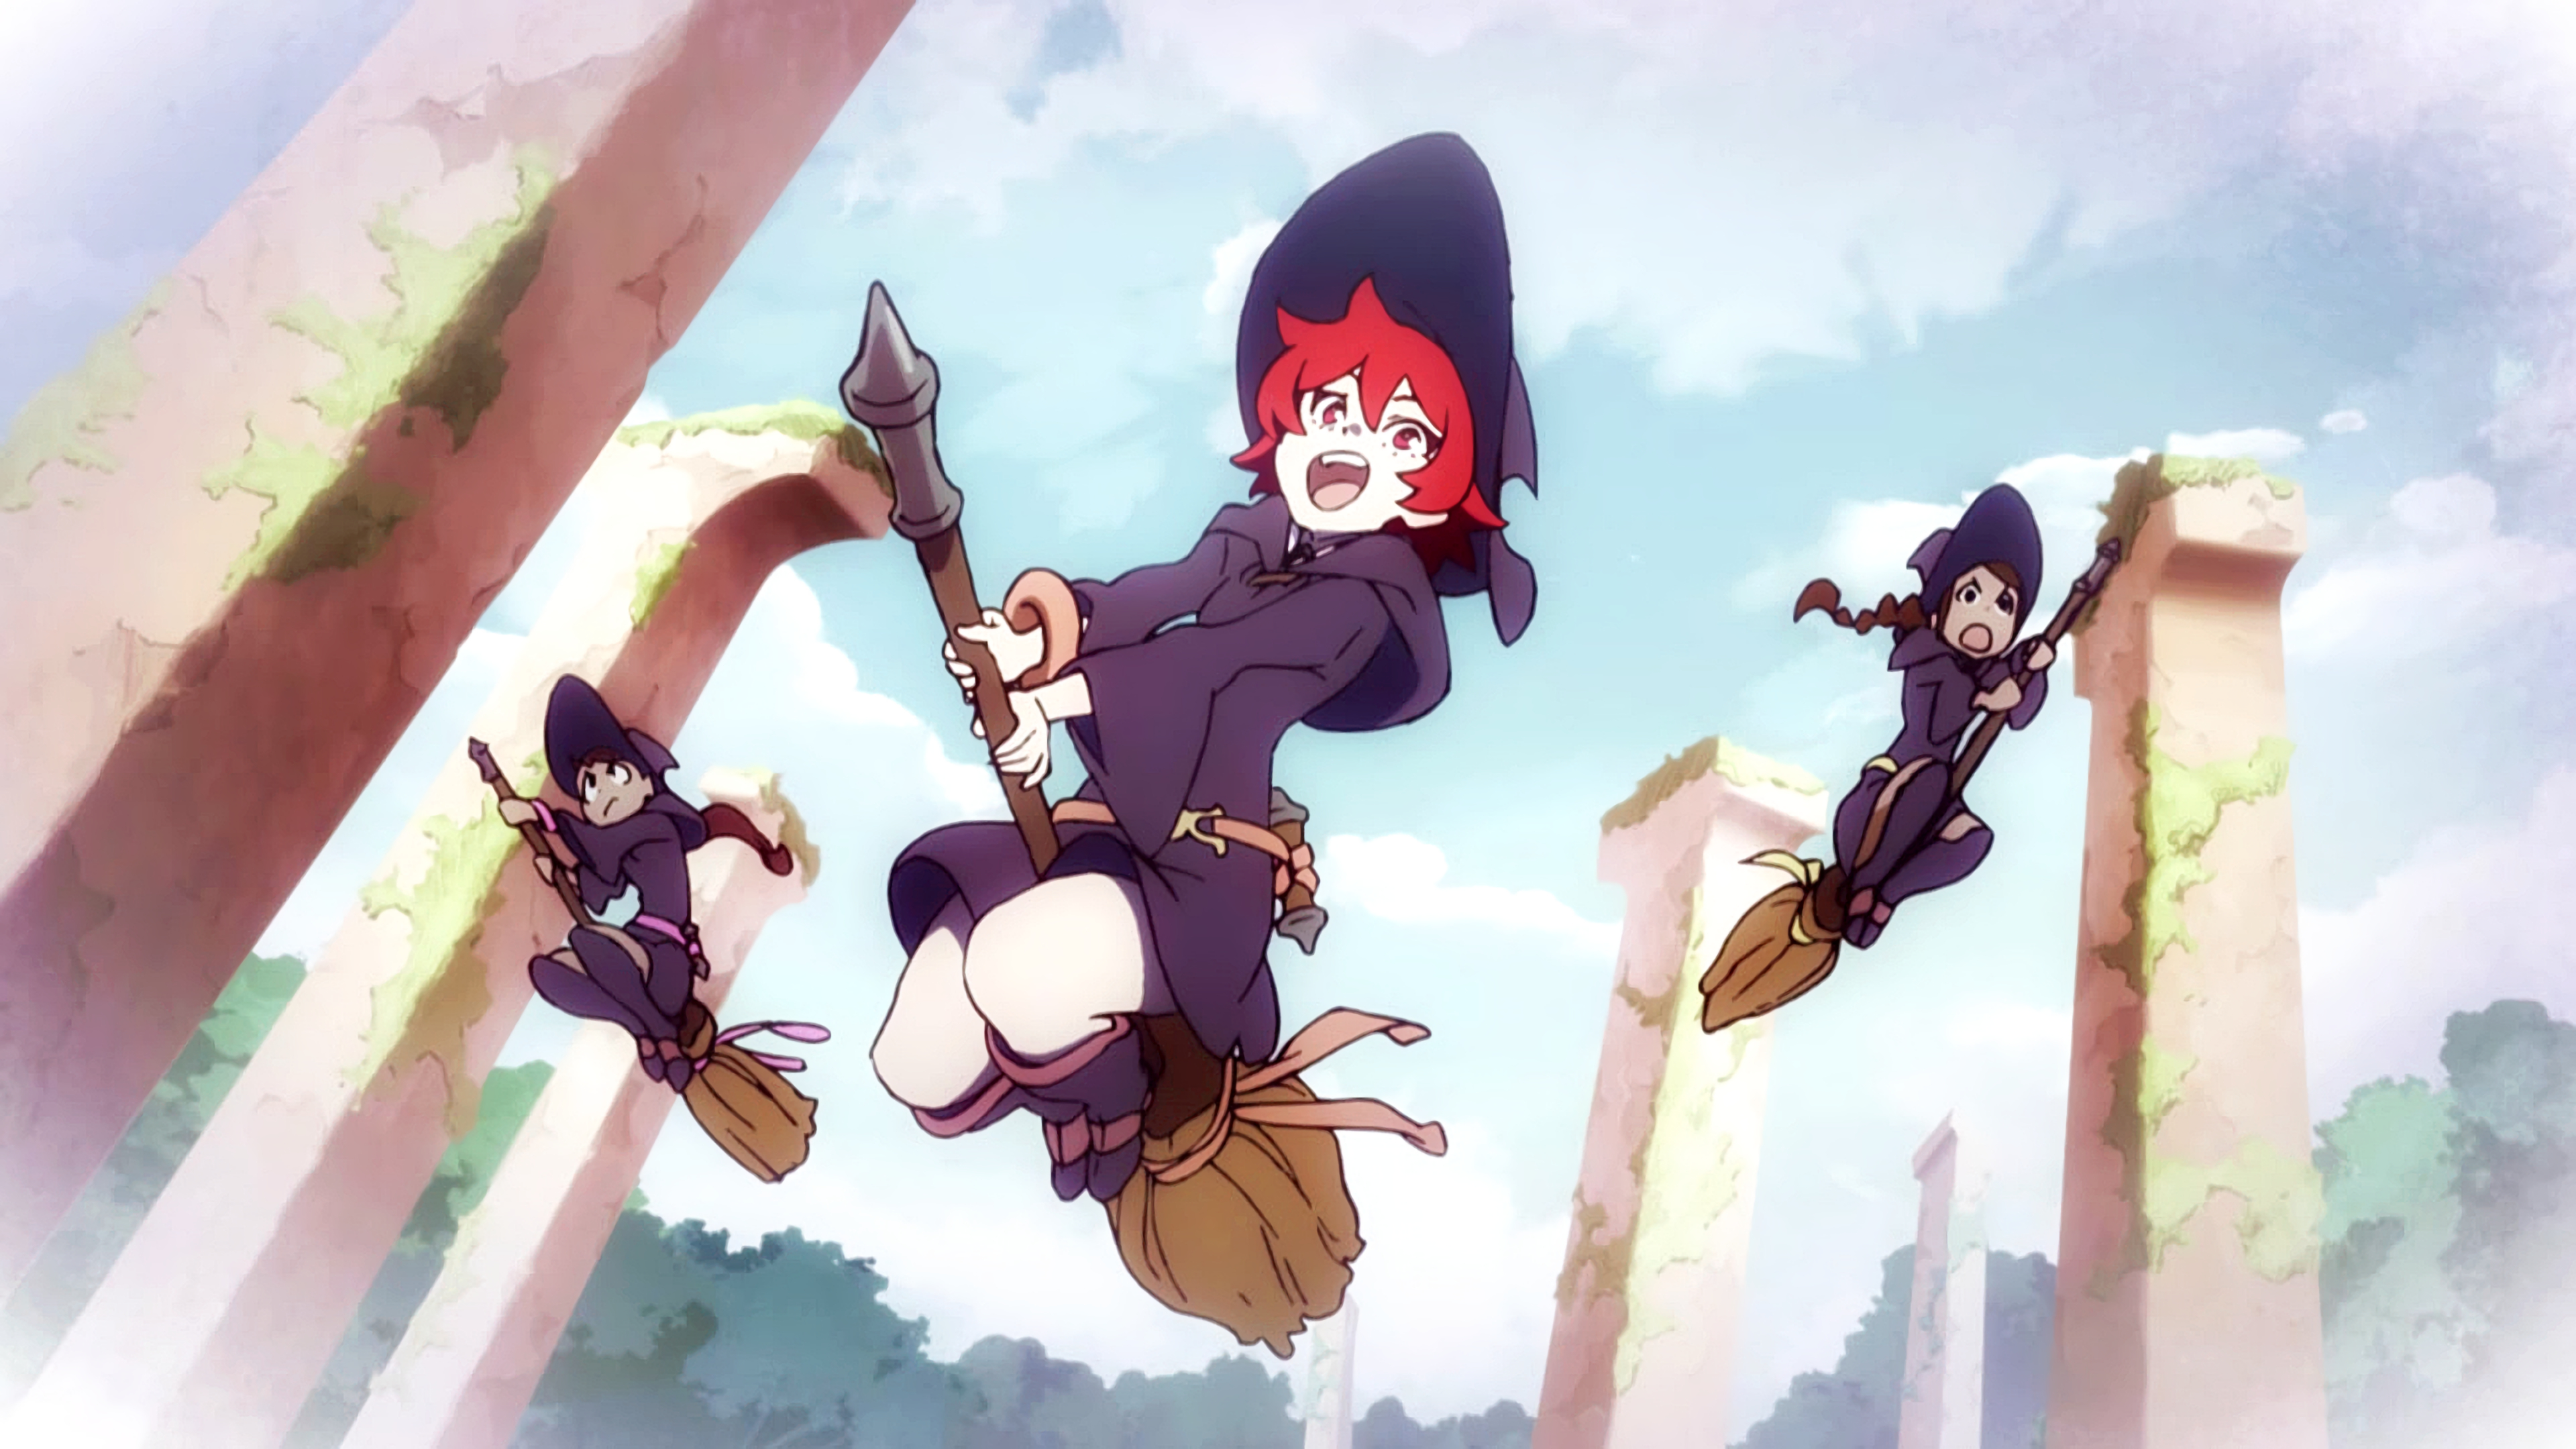 Anime 3840x2160 Little Witch Academia Chariot du Nord witch witch hat witch's broom flying smiling redhead red eyes anime screen shot Anime screenshot Luna Nova uniform short hair boots trigger